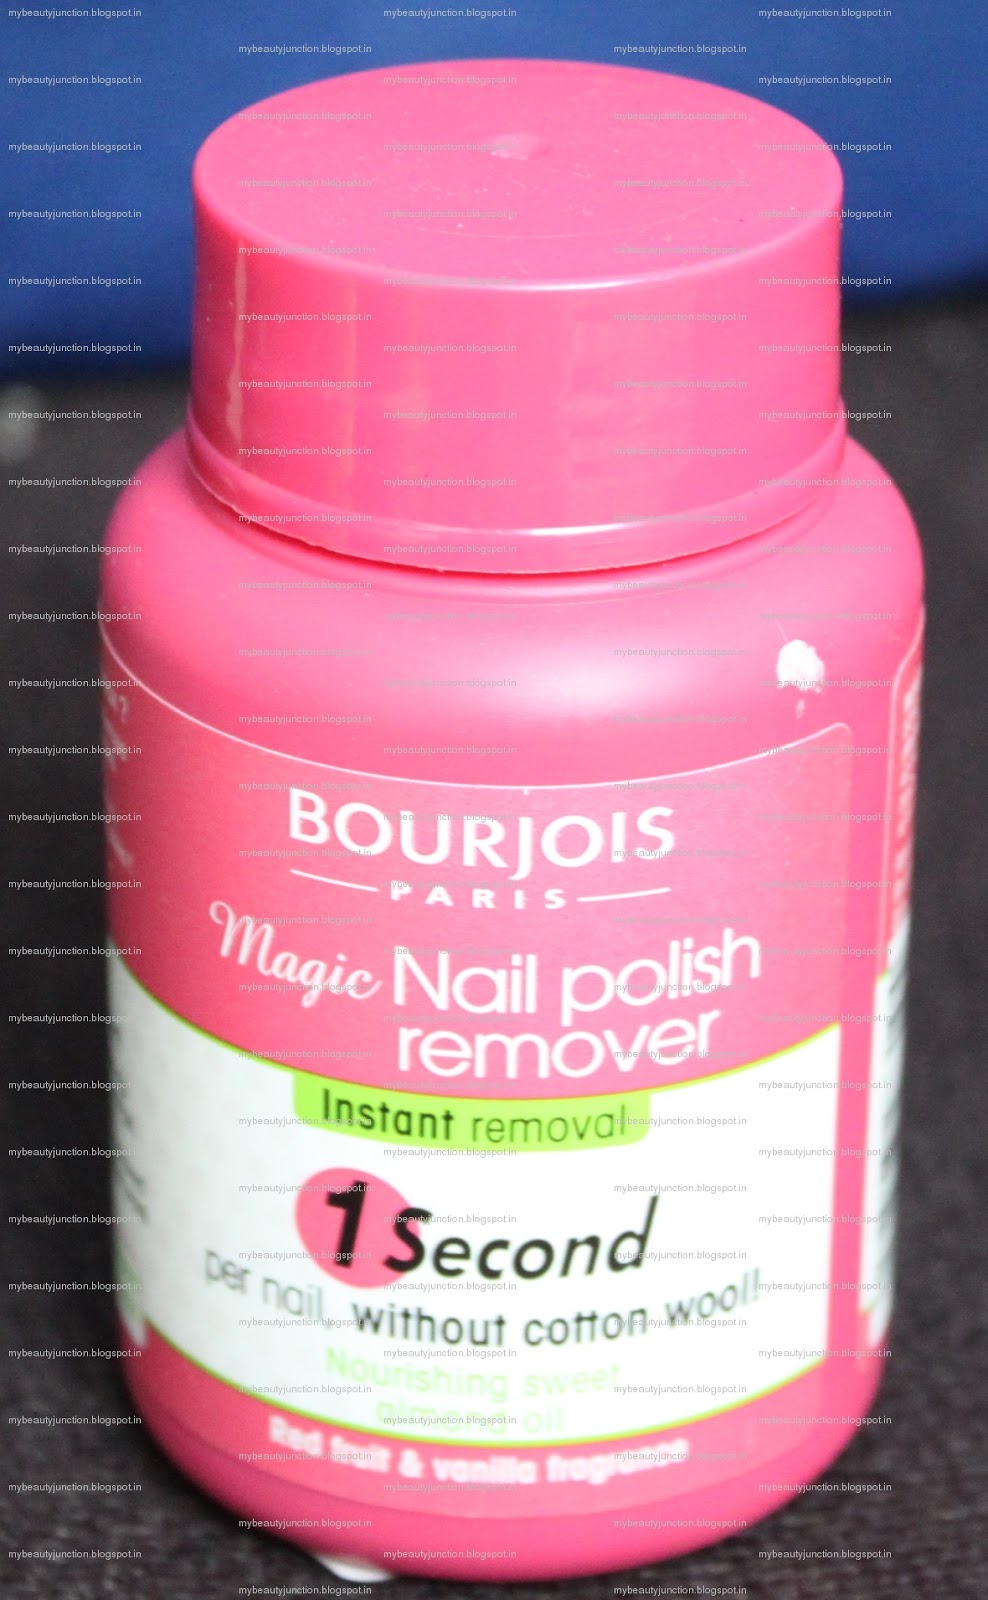 Bourjois One Second Magic Nail Polish Remover review